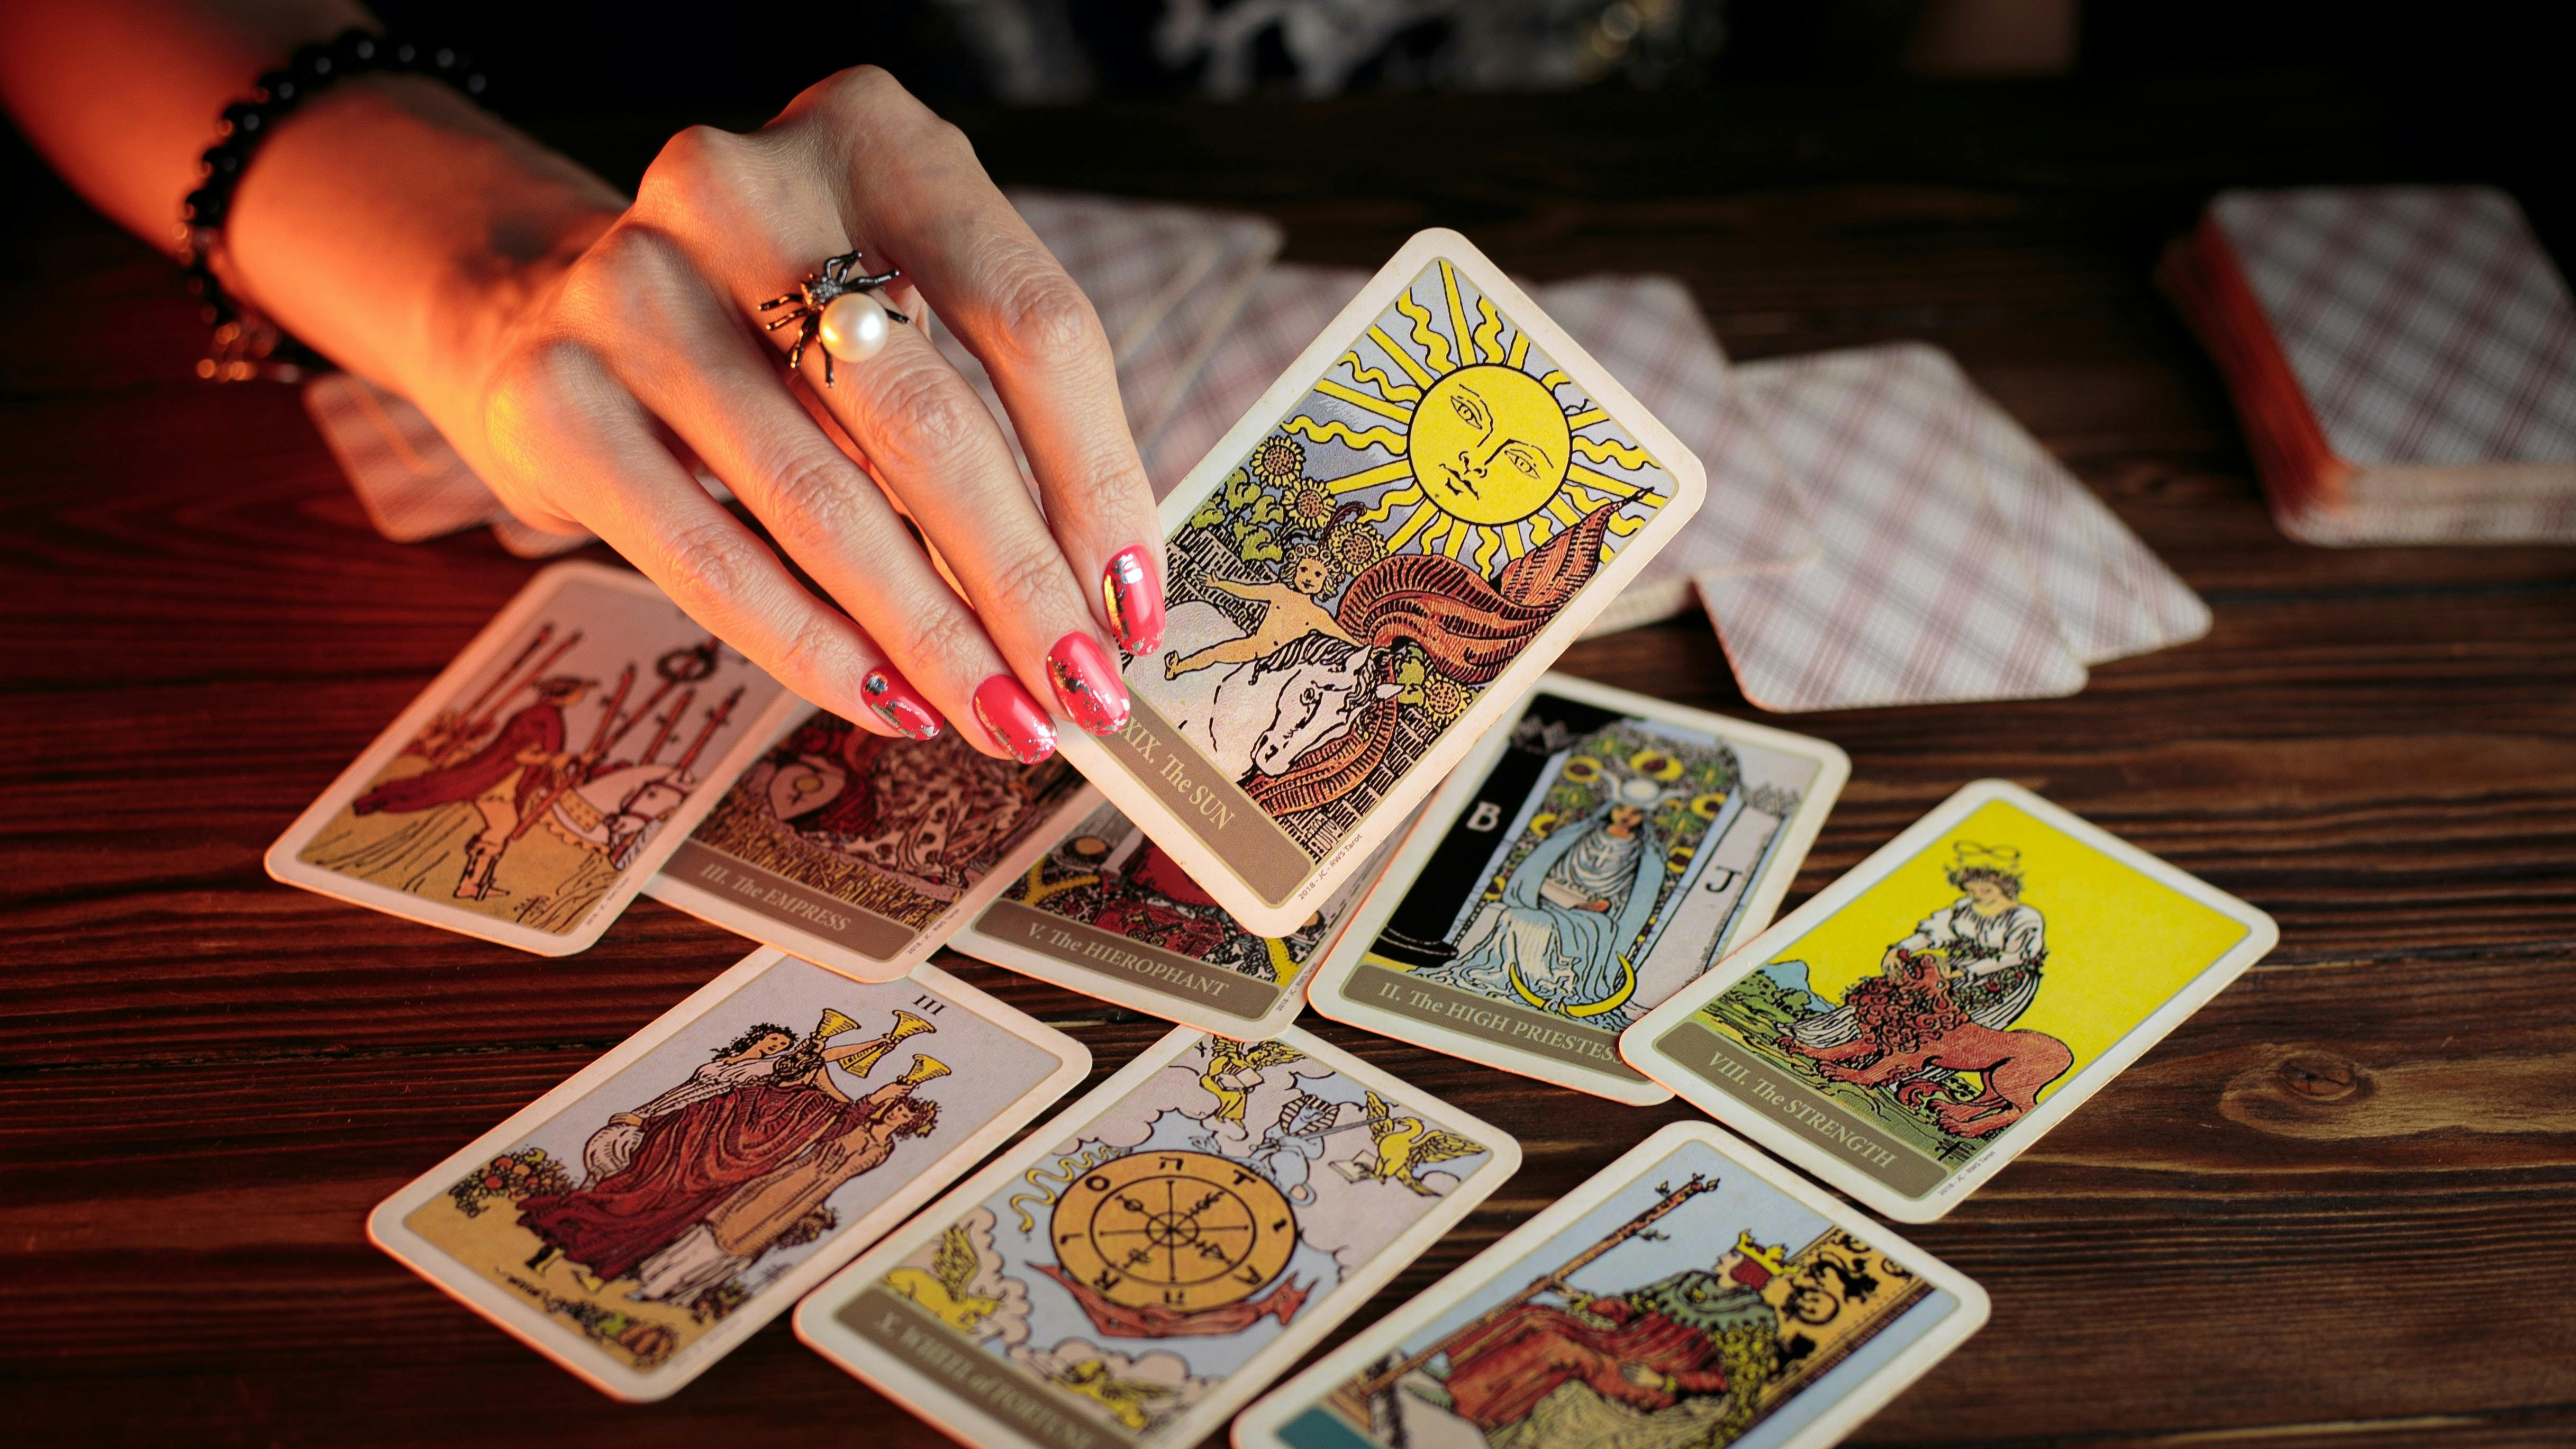 3 Tarot Card Reading Services To Discover Your Destiny & Purpose